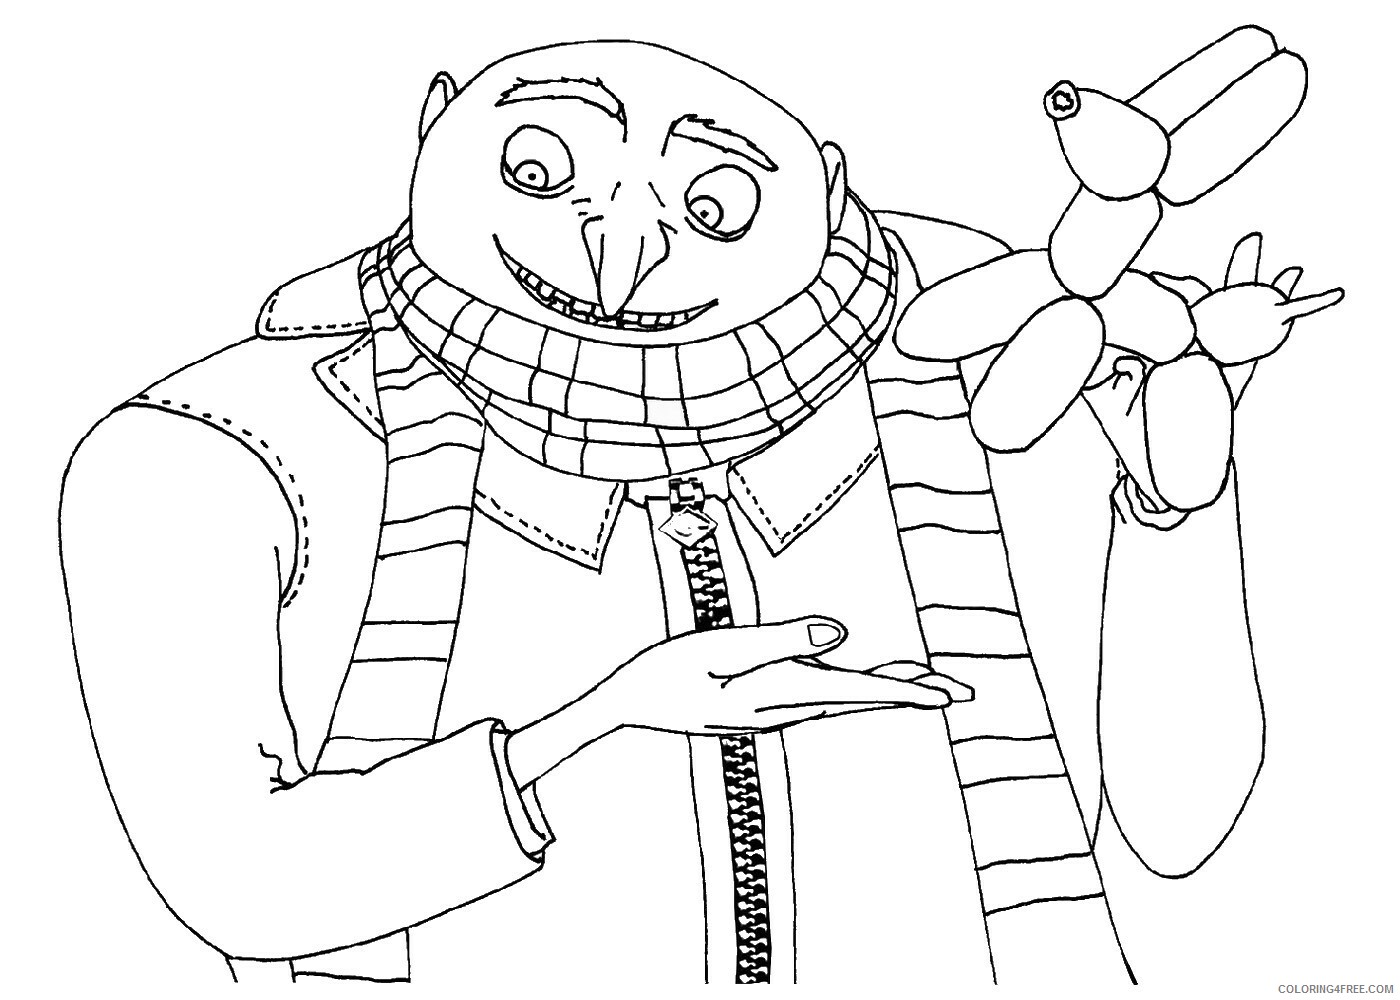 Despicable Me Coloring Pages TV Film despicable_me_cl_06 Printable 2020 02471 Coloring4free